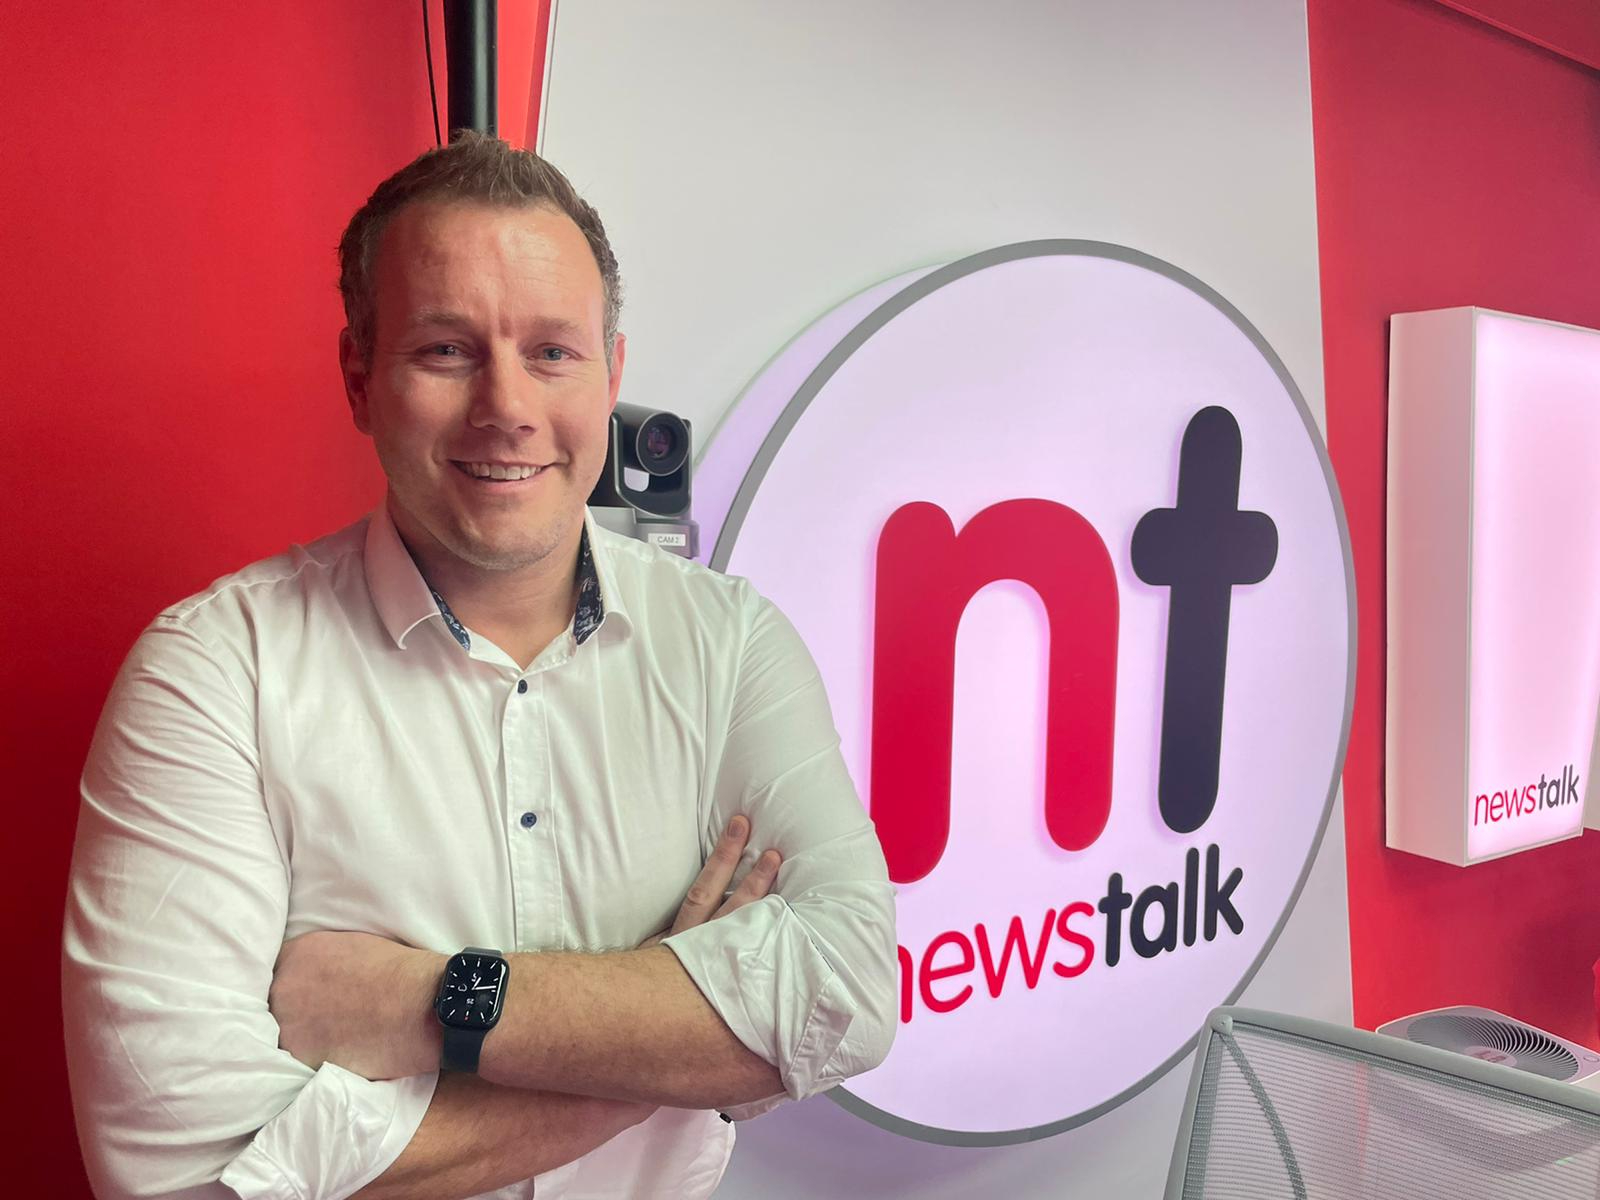 FreeNow General Manager for Ireland Niall Carson in the Newstalk studio.